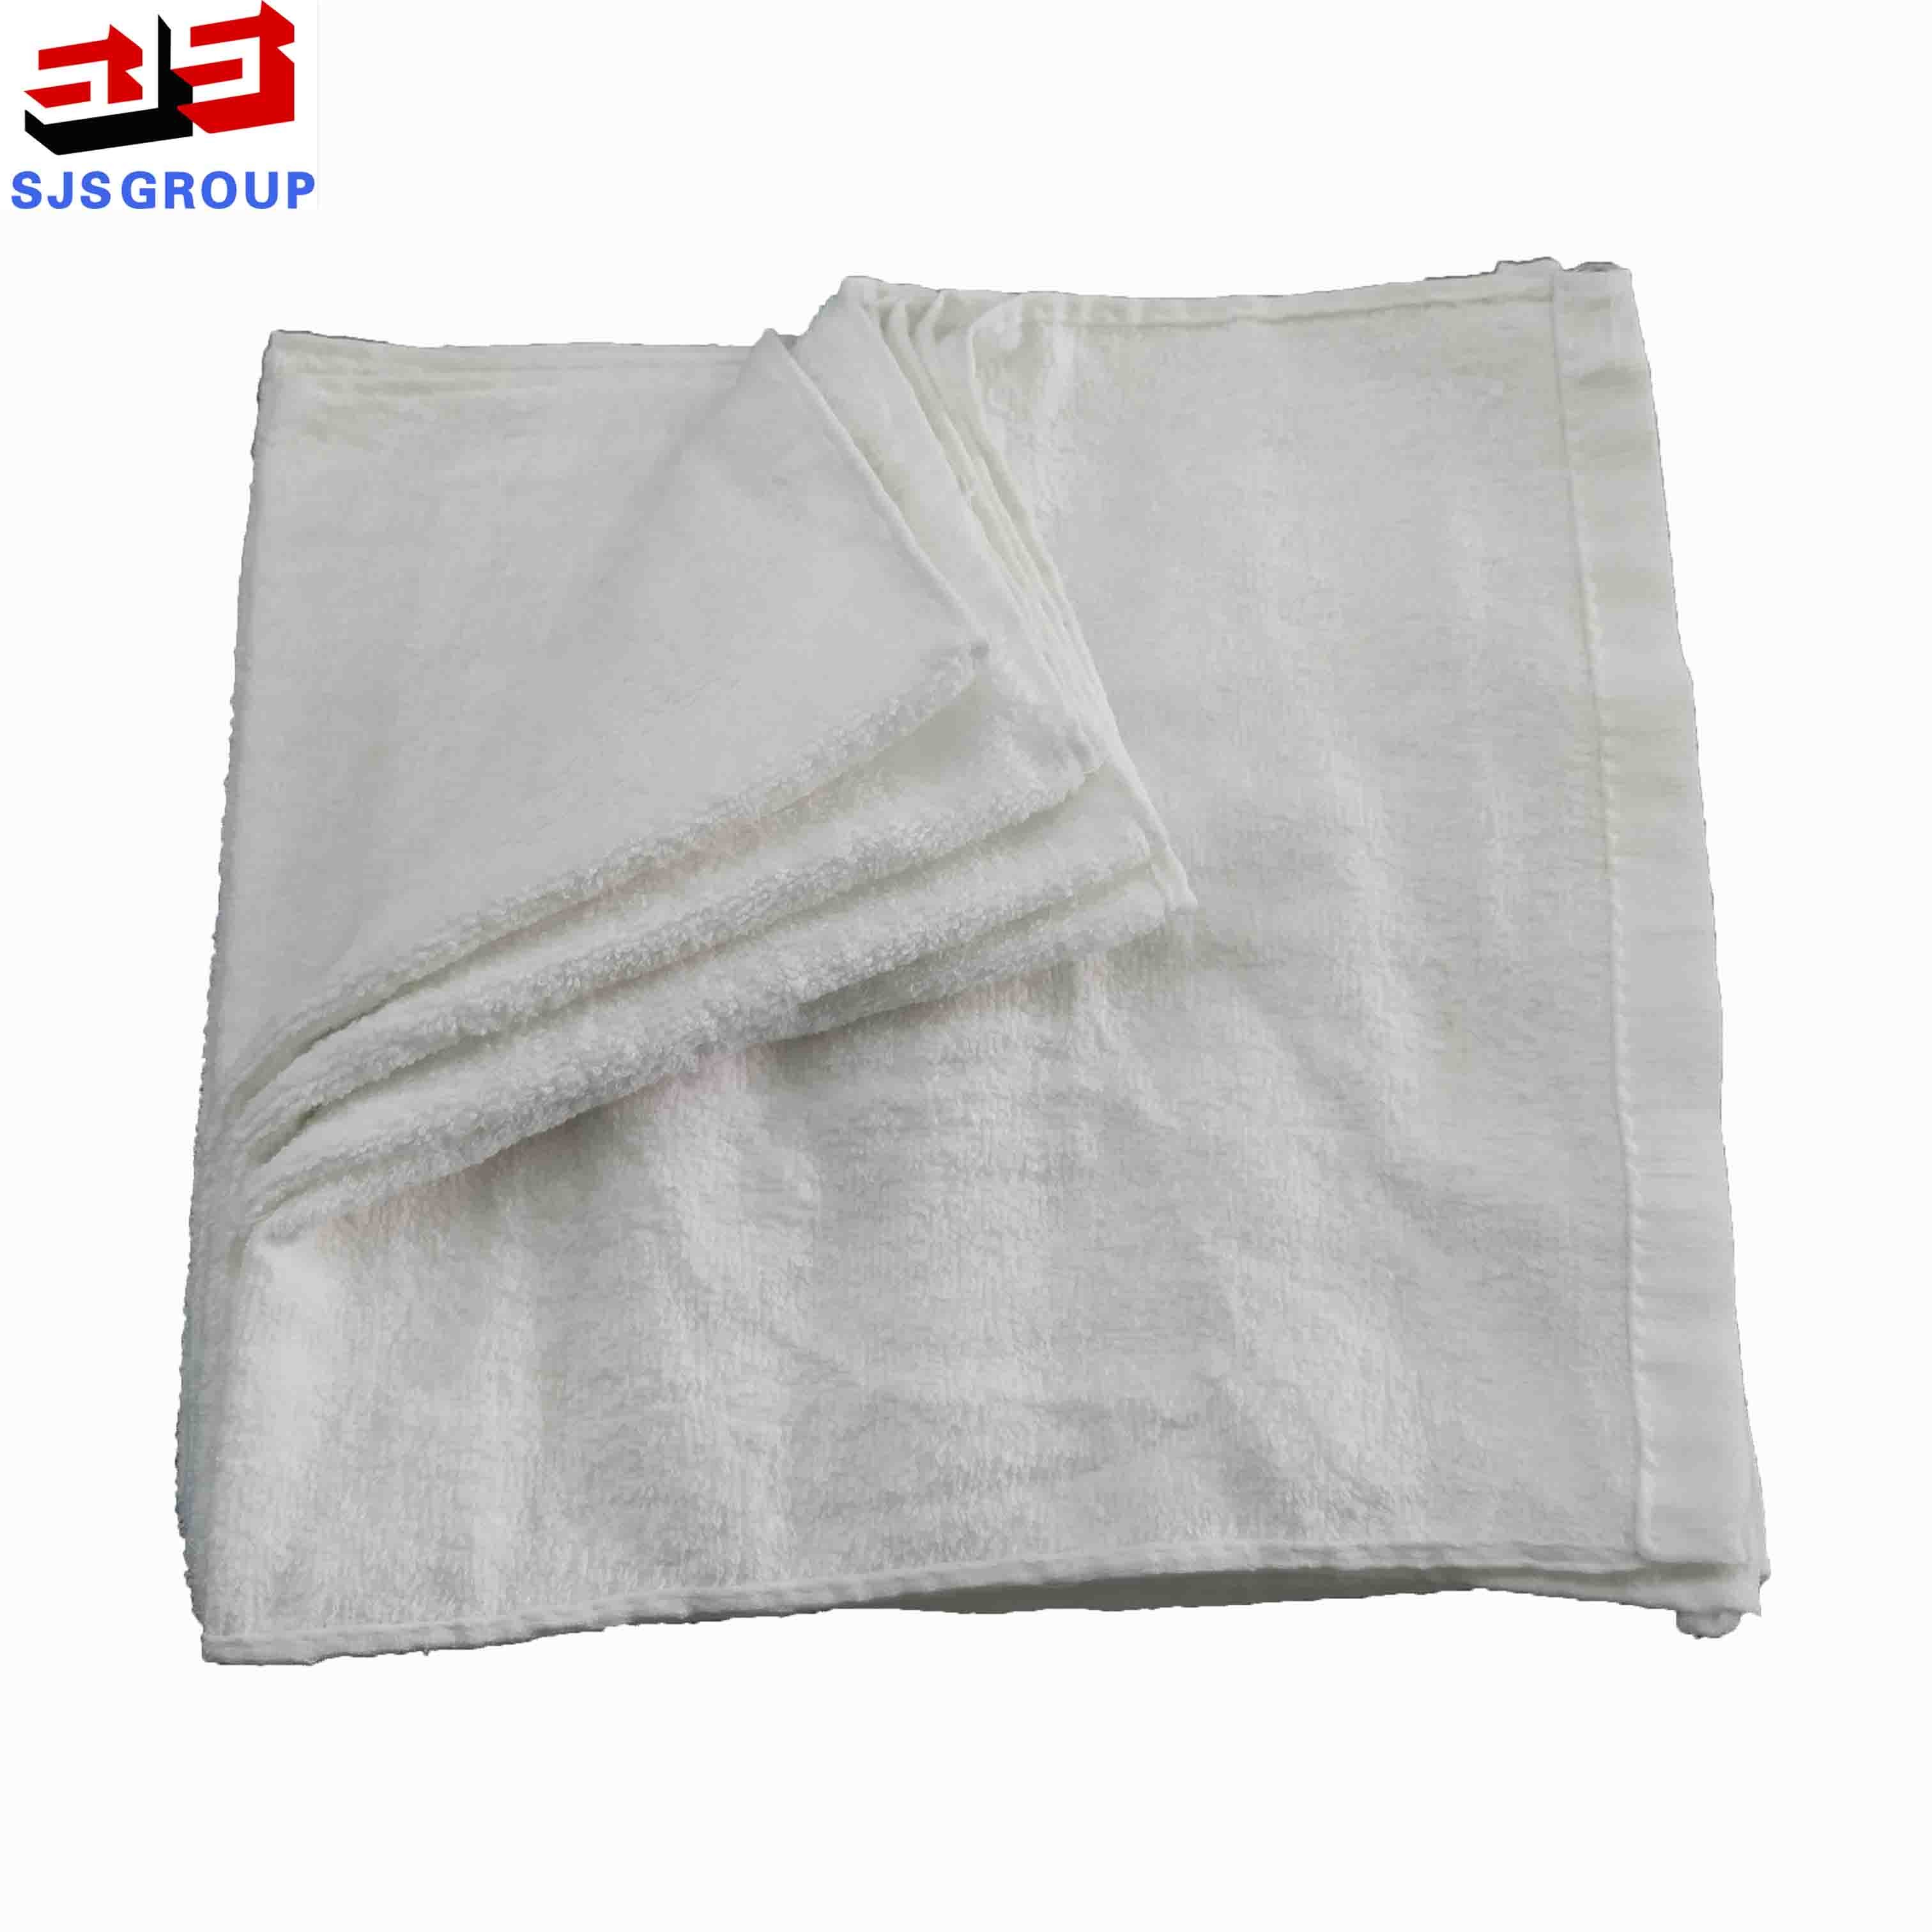 Towel Cutting 25kg Packing Cotton Wiping Rags